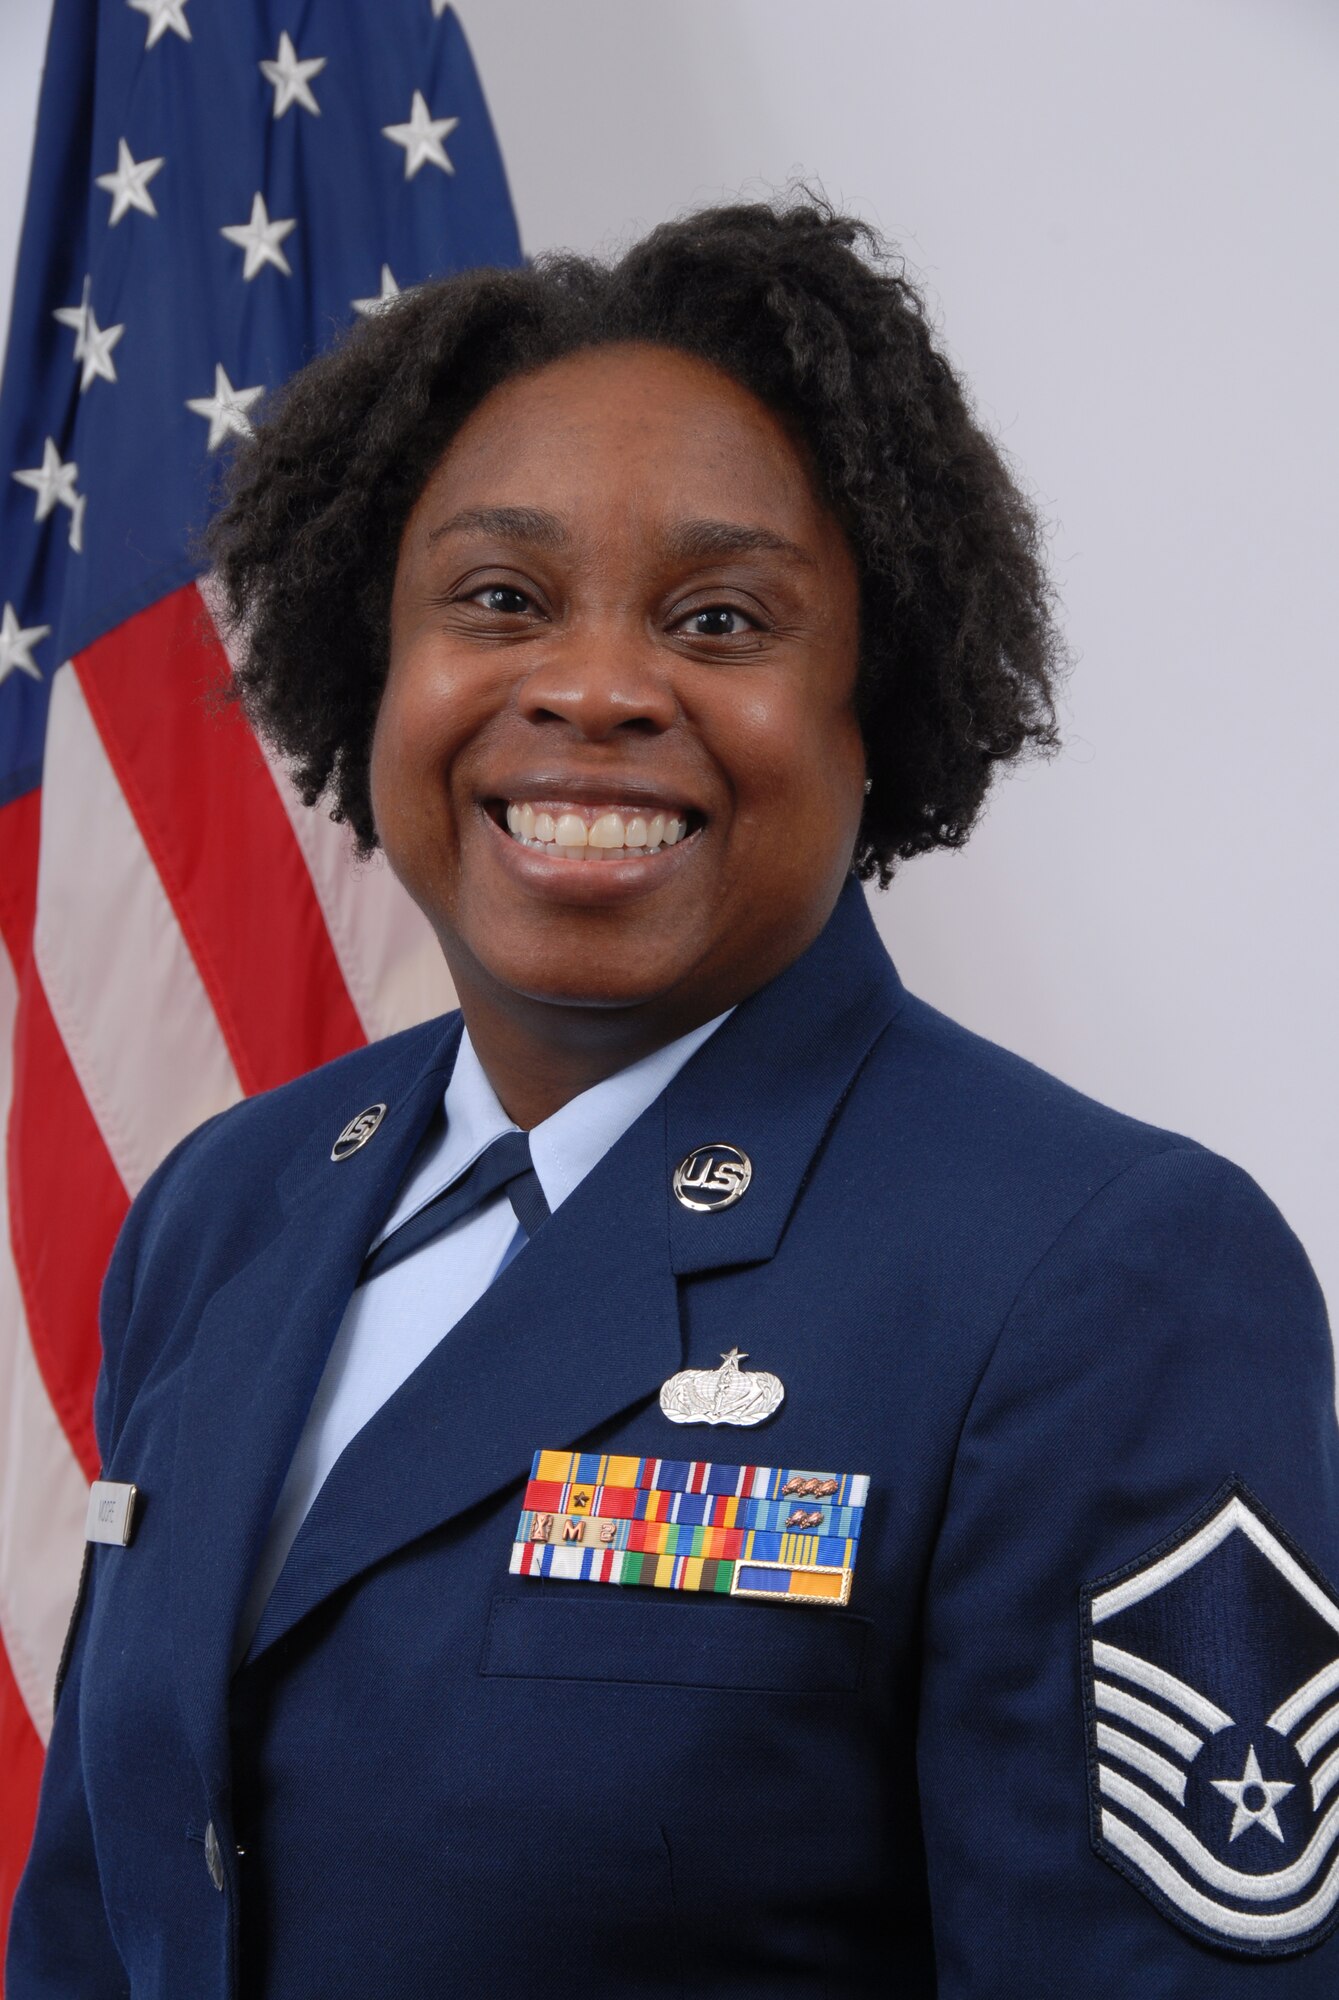 Master Sergeant Robbin Moore, Delaware Air National Guard Outstanding Senior NCO of the Year for 2008. Sgt. Moore is a services craftsman, 166th Services Flight, and a resident of Elkton, Md. (U.S. Air Force photo/Staff Sgt. Melissa Chatham, Delaware Air National Guard)